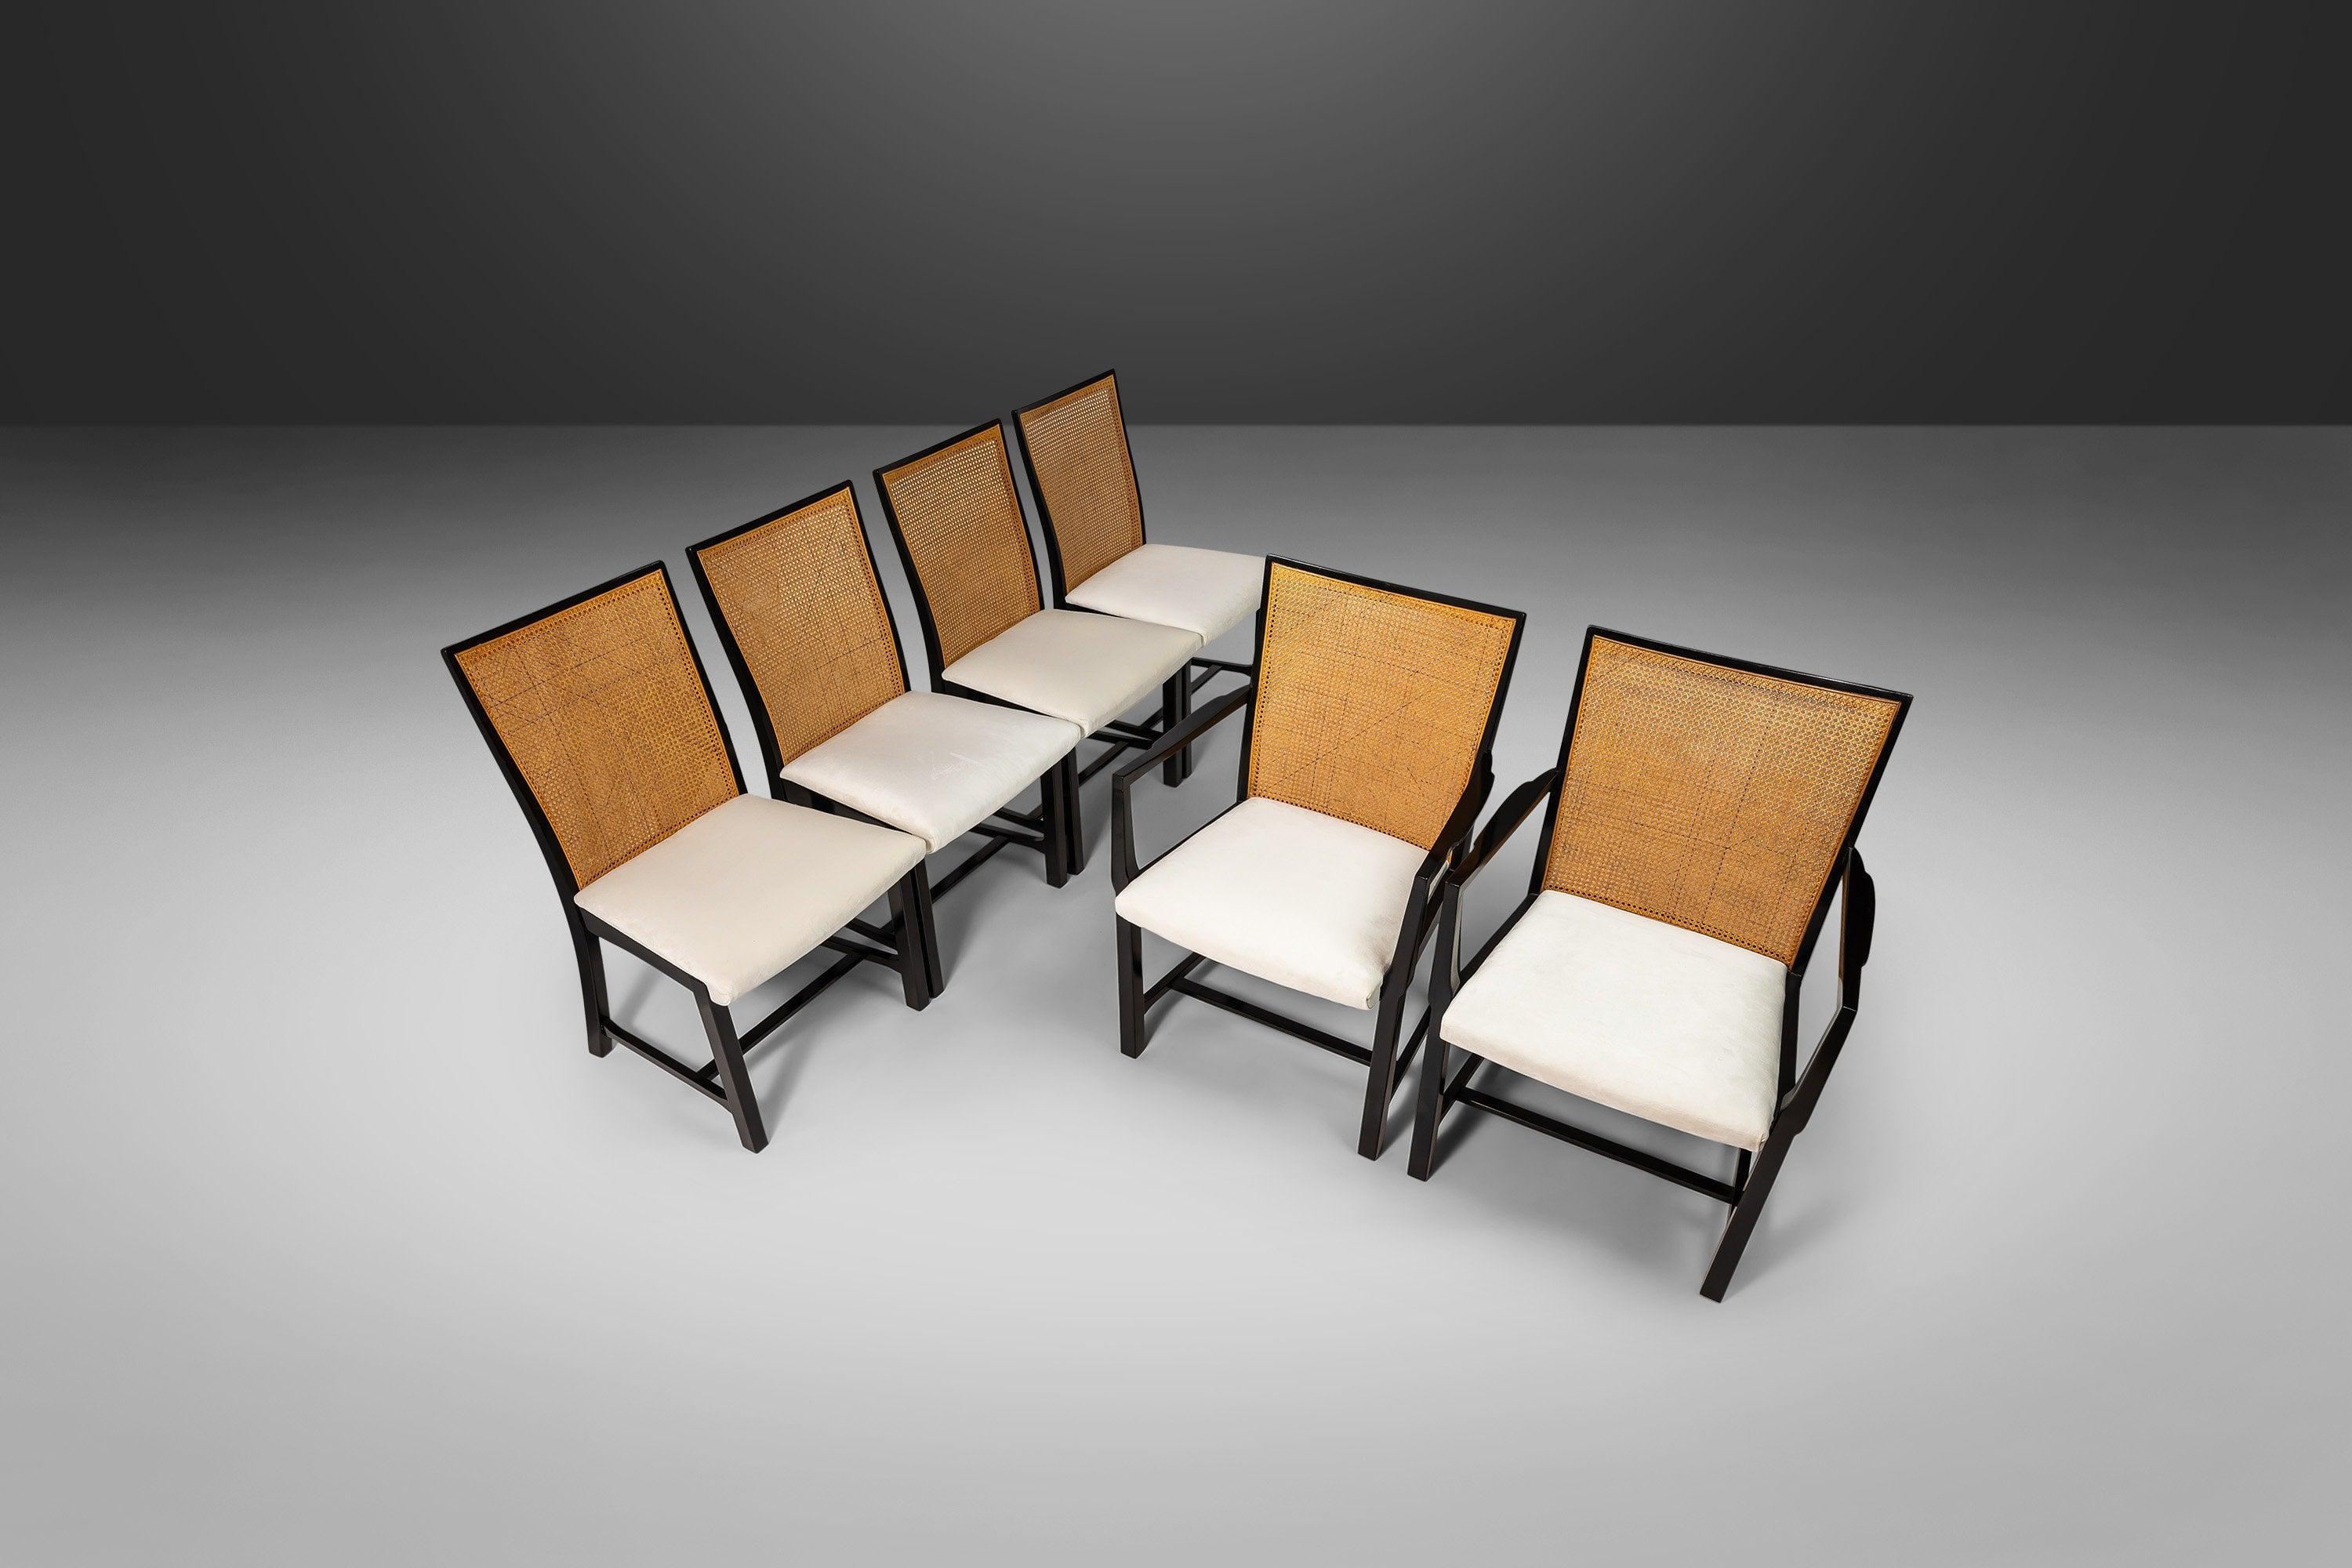 Rare, exceptional, highly collectable, and ready for installation. This set of 6 chairs (4 side chairs and 2 armchairs) is from the New World Collection designed by Michael Taylor for Baker Furniture. The set is masterfully crafted from solid cherry